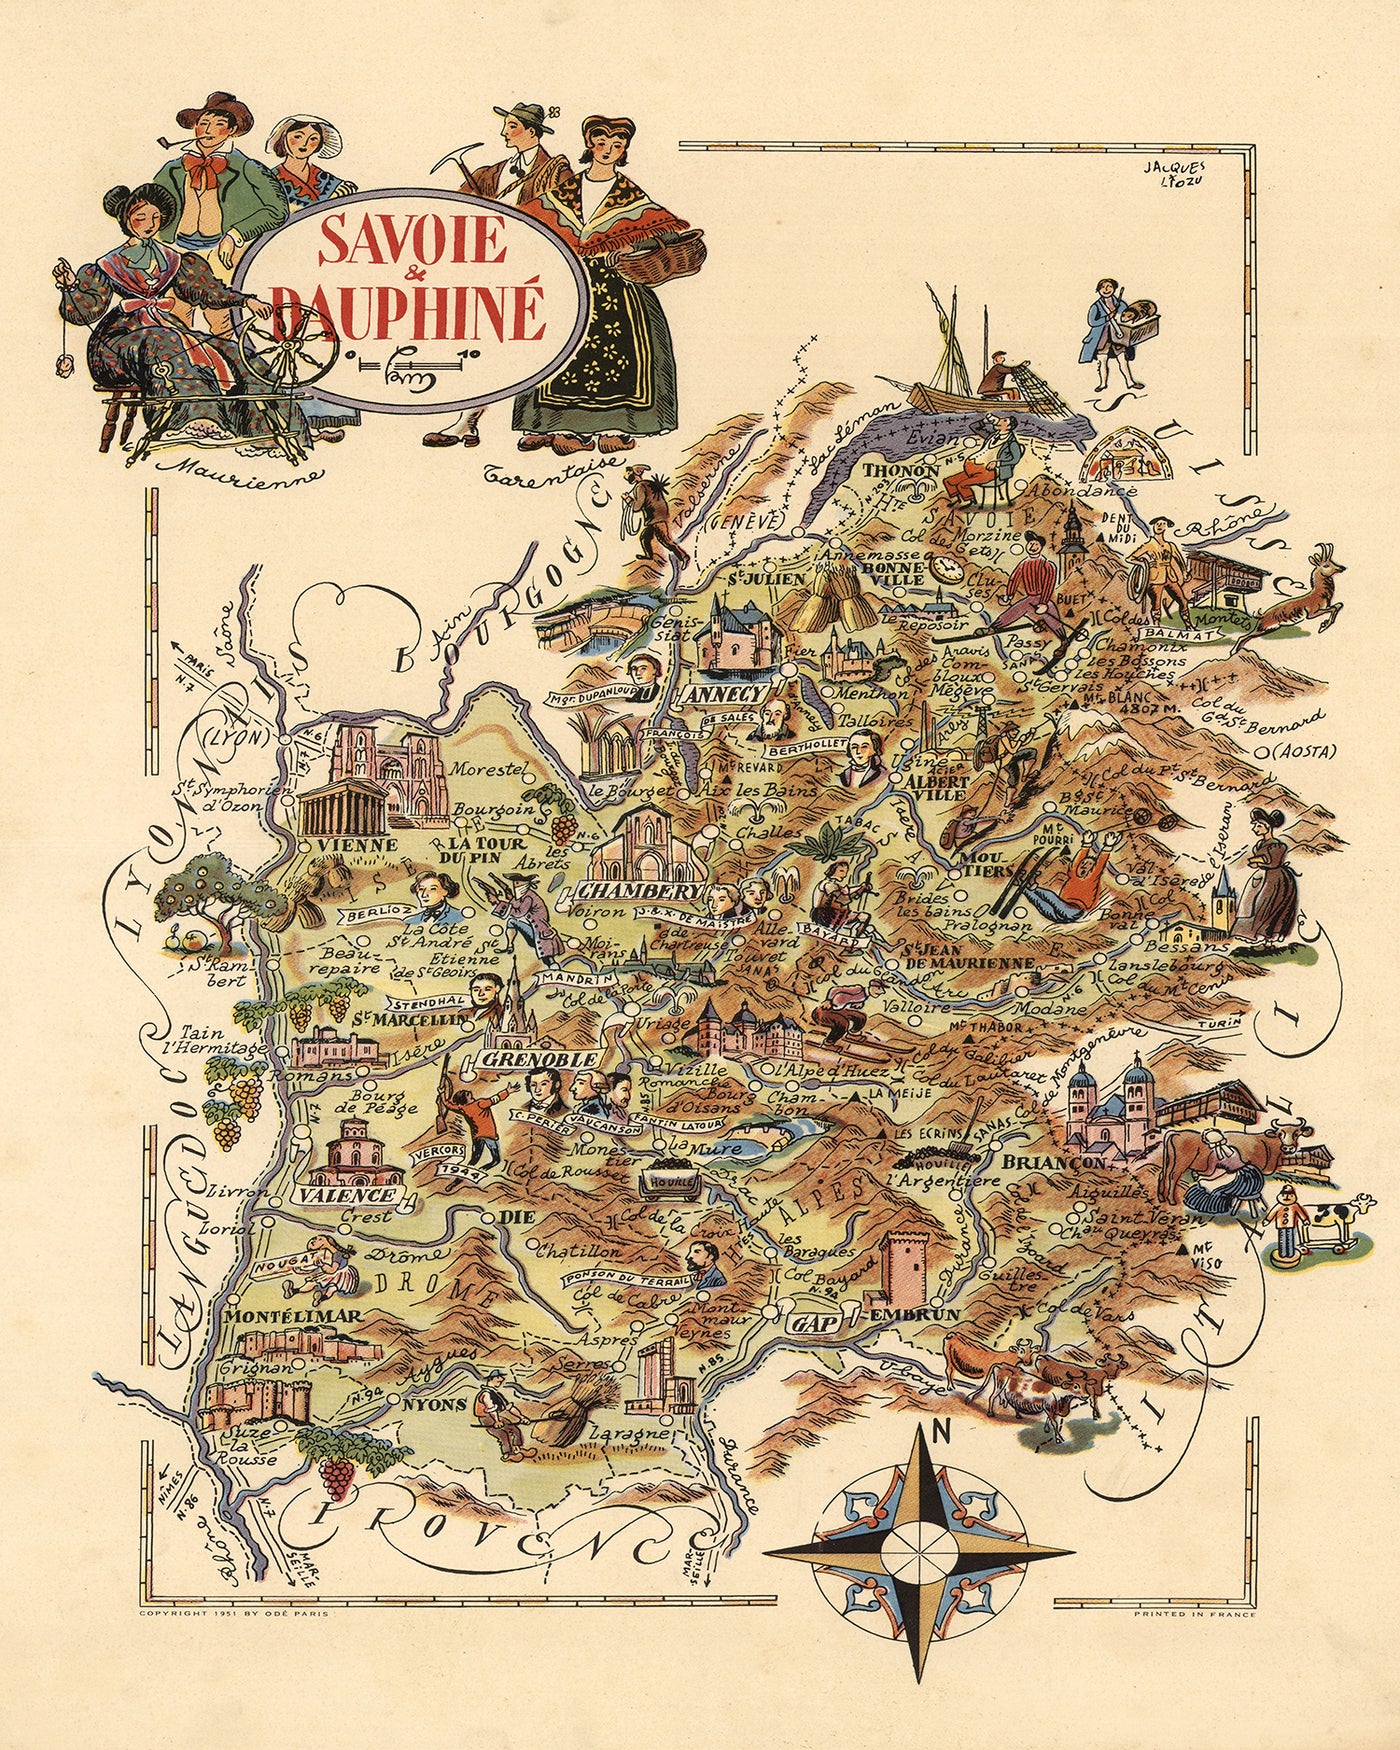 Old Map of Savoie & Dauphine, France by Jacques Liozu, 1951: Alps, Grenoble, Chambéry, Annecy